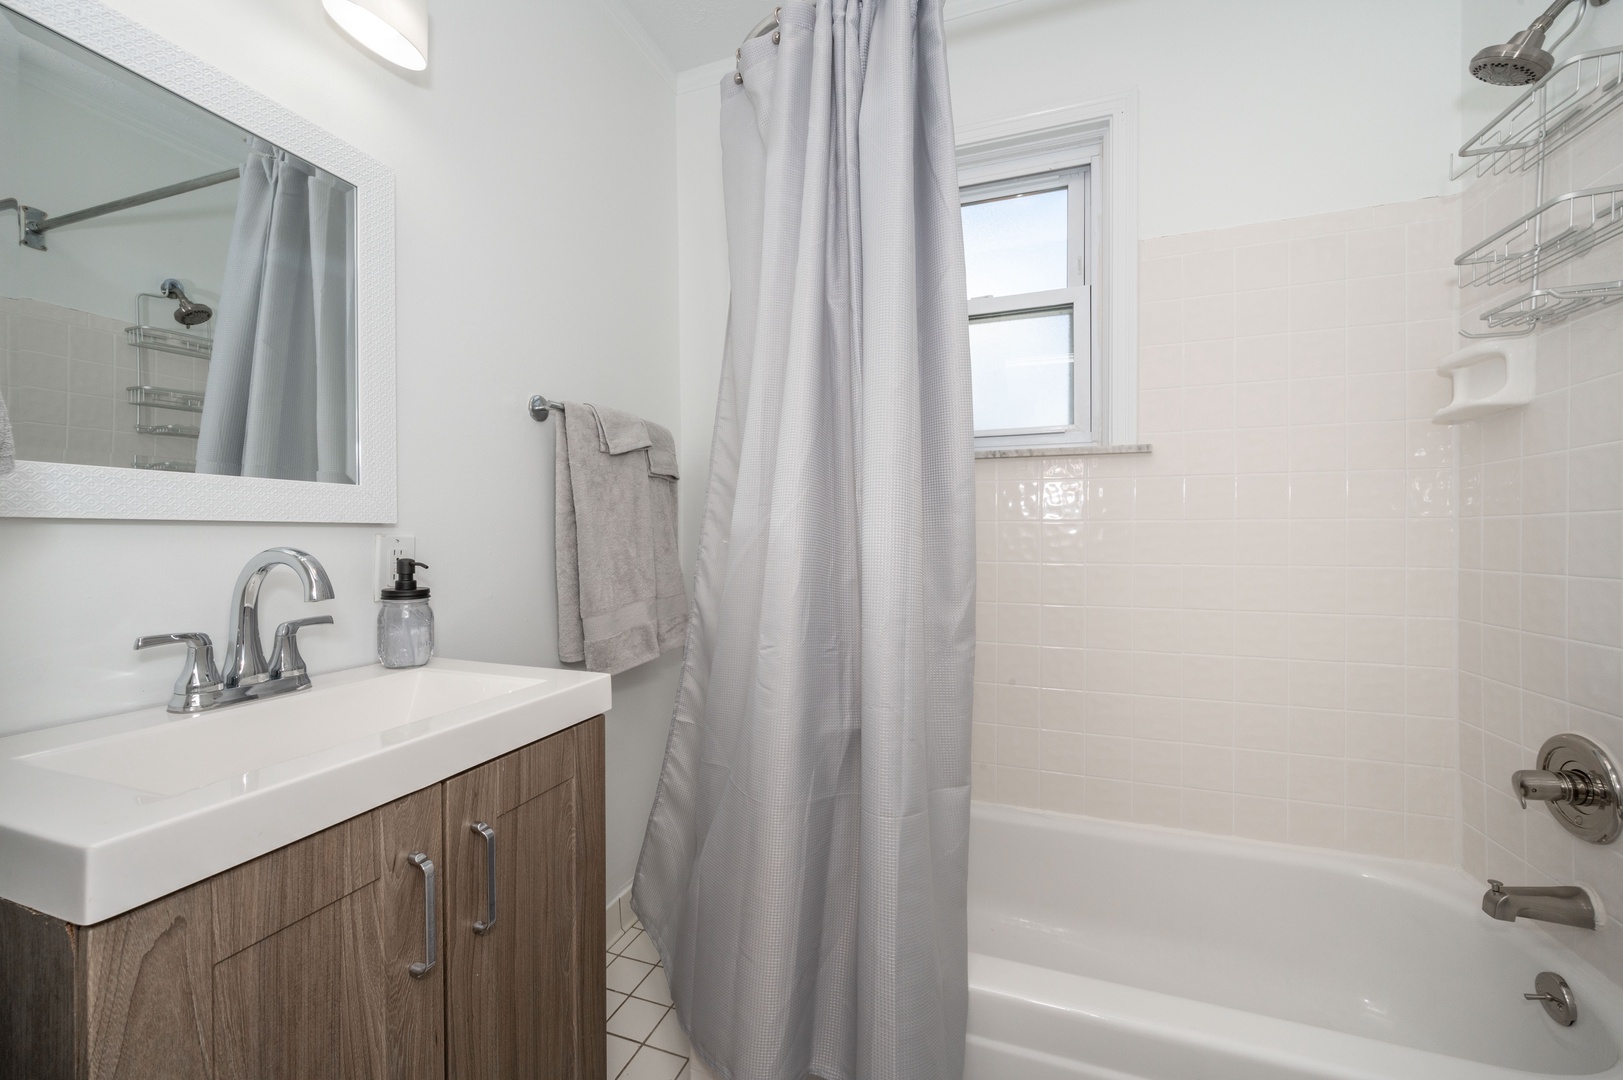 The main-level full bath offers a single vanity & shower/tub combo